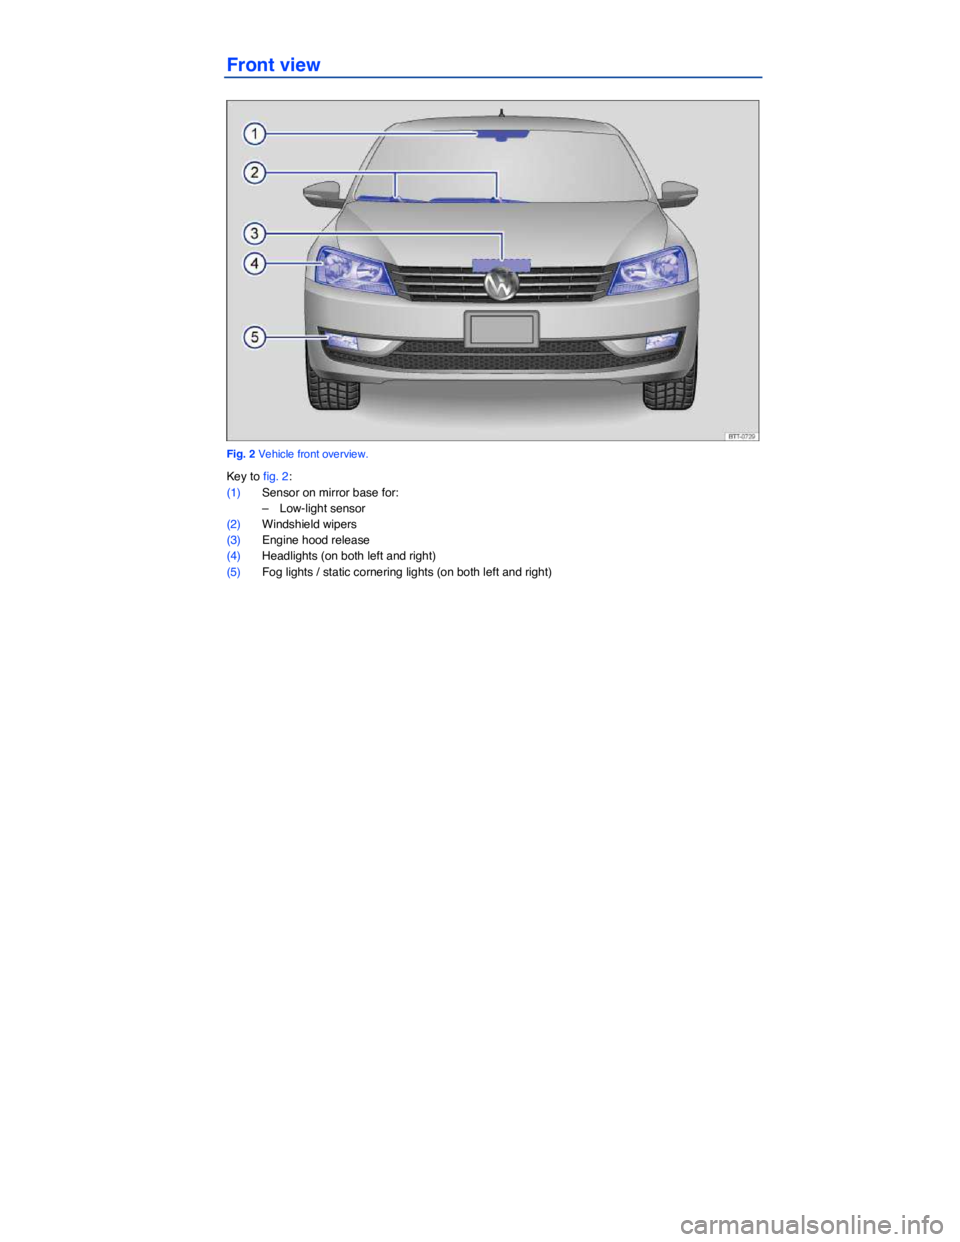 VOLKSWAGEN PASSAT 2014  Owner´s Manual  
Front view 
 
Fig. 2 Vehicle front overview. 
Key to fig. 2: 
(1) Sensor on mirror base for: 
–  Low-light sensor  
(2) Windshield wipers  
(3) Engine hood release  
(4) Headlights (on both left a